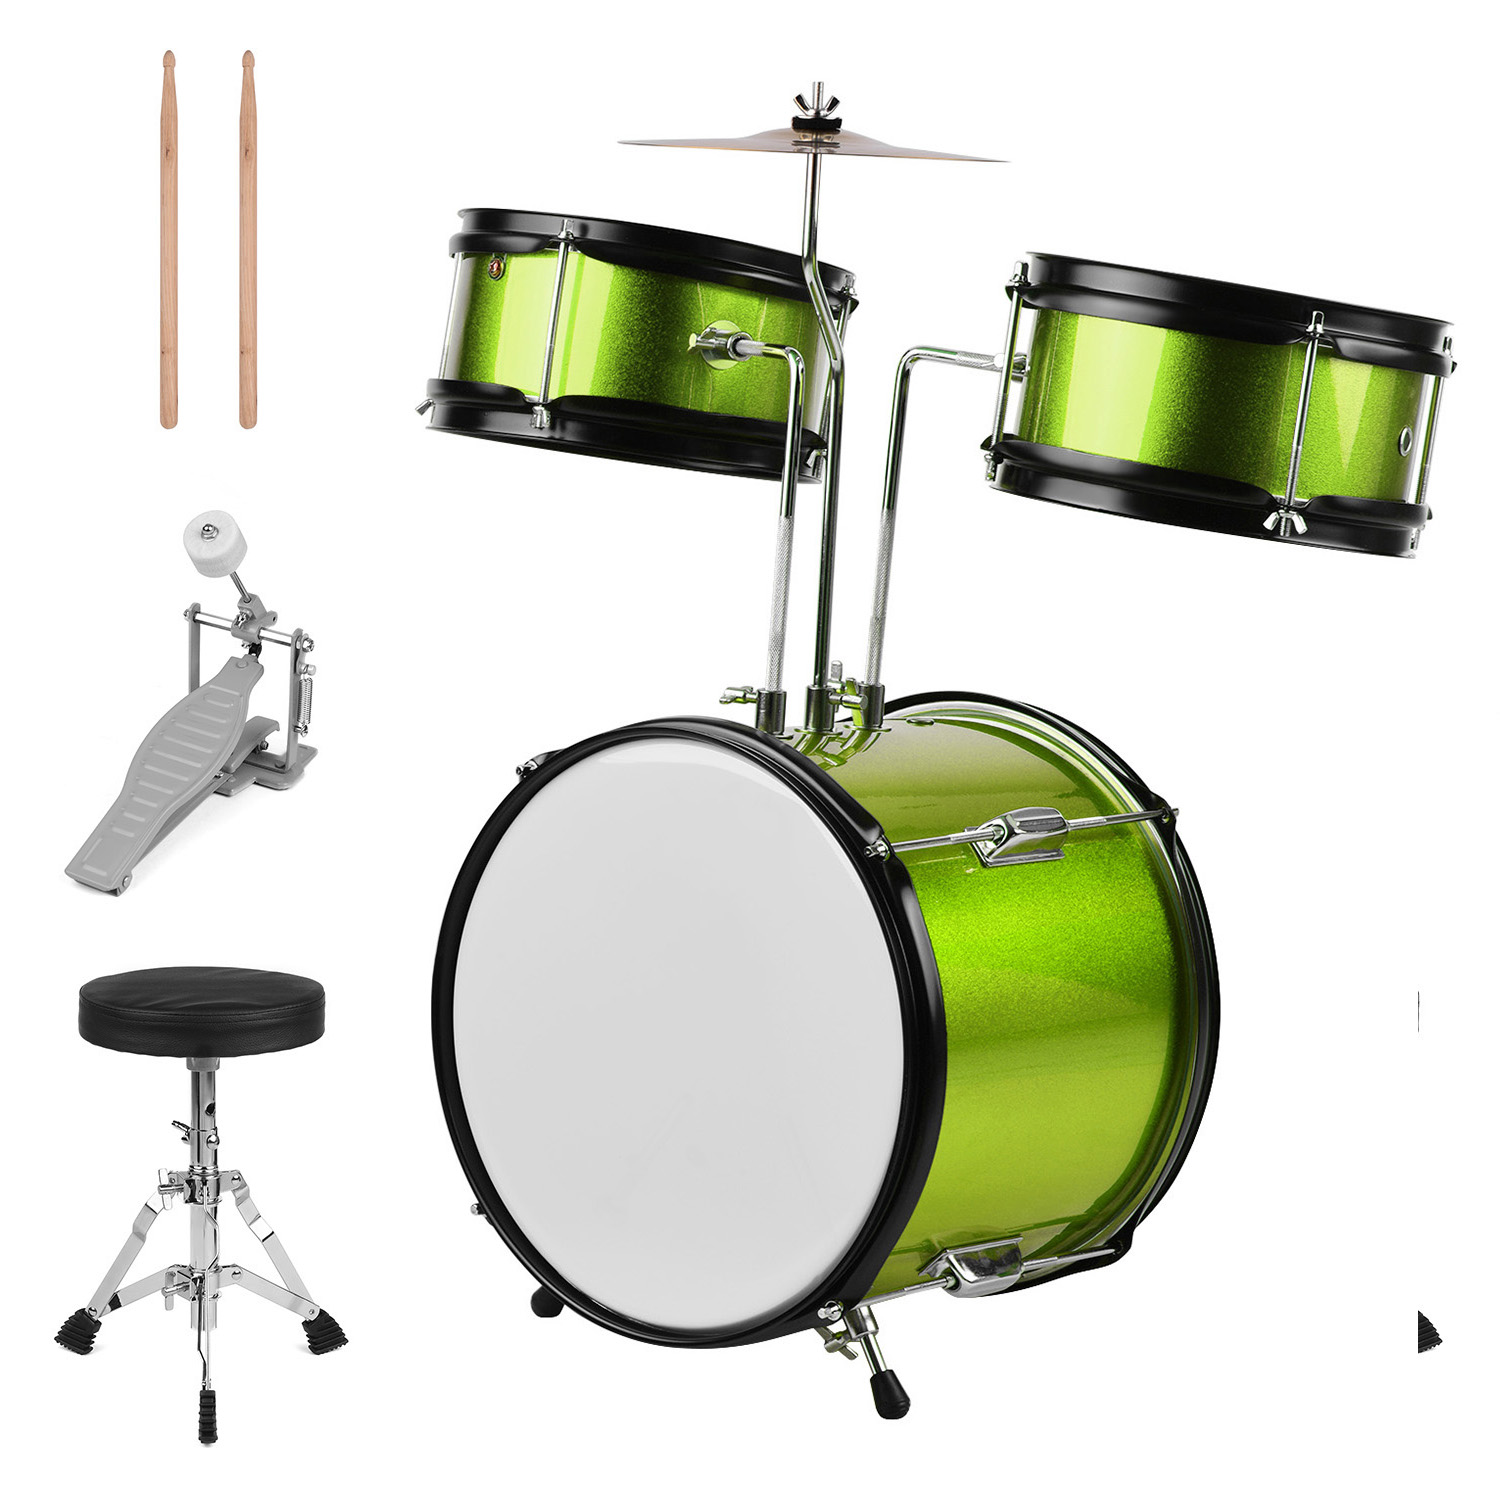 Kids Children Junior Beginners 3-Piece Drum Set Drums Kit Percussion Musical Instrument with Cymbal Drumsticks Adjustable Stool